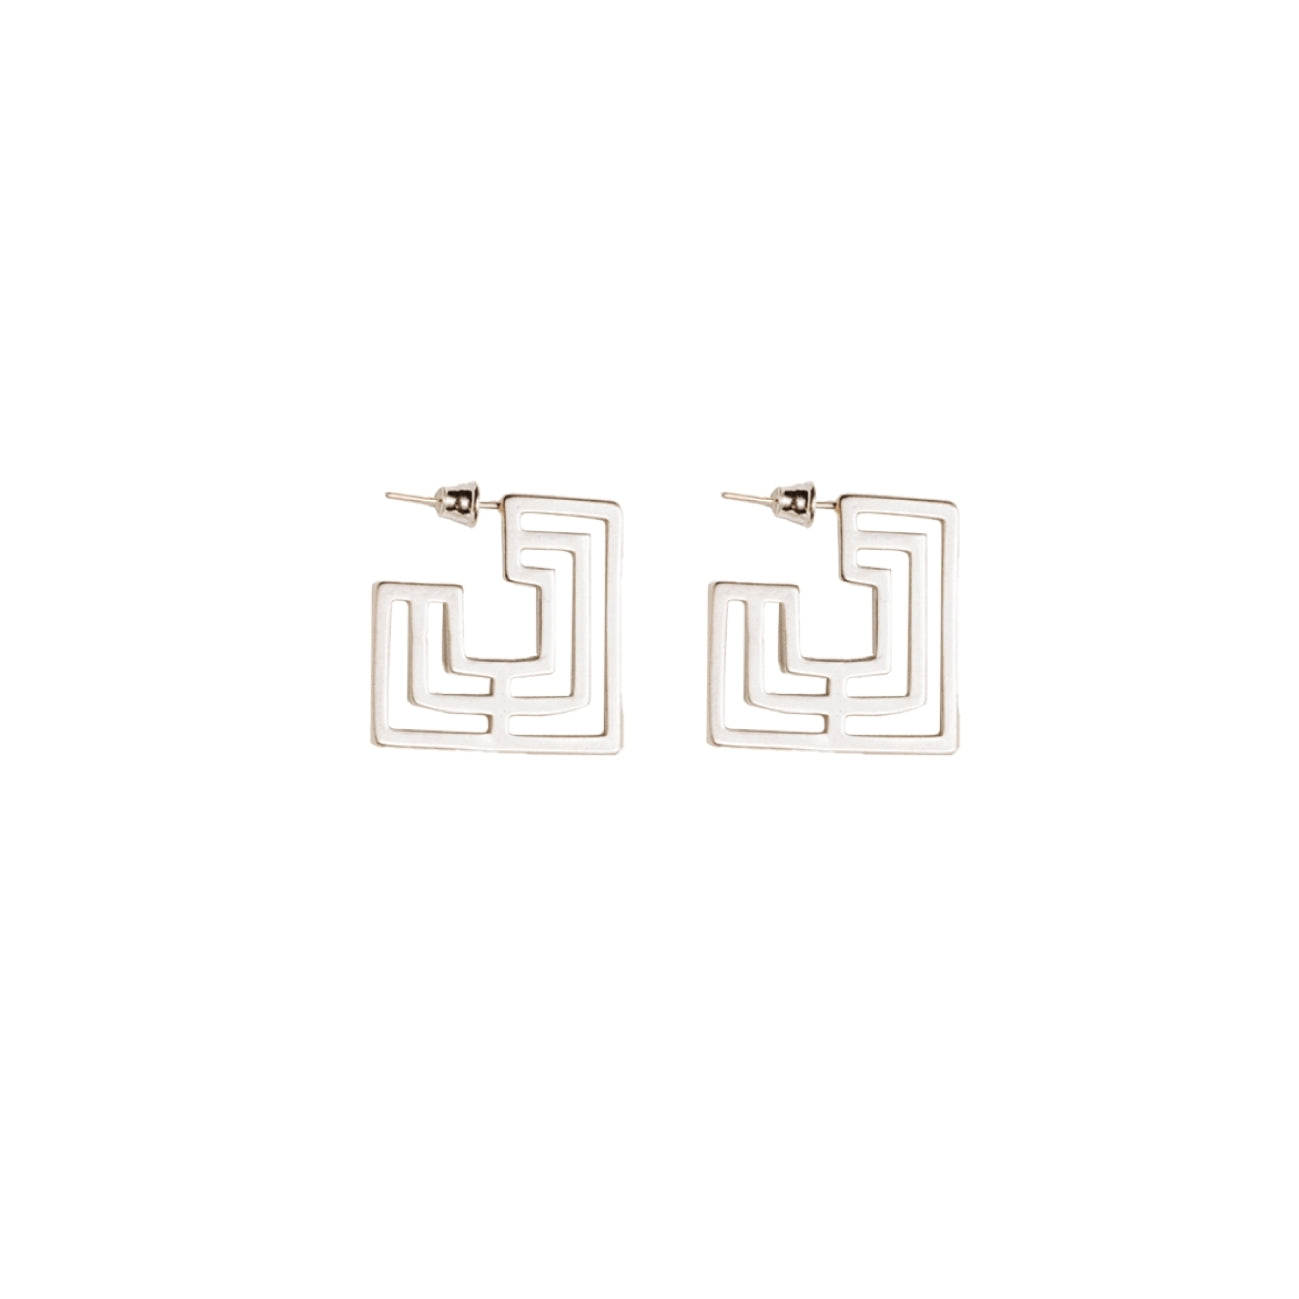 The Introspect Square Earrings